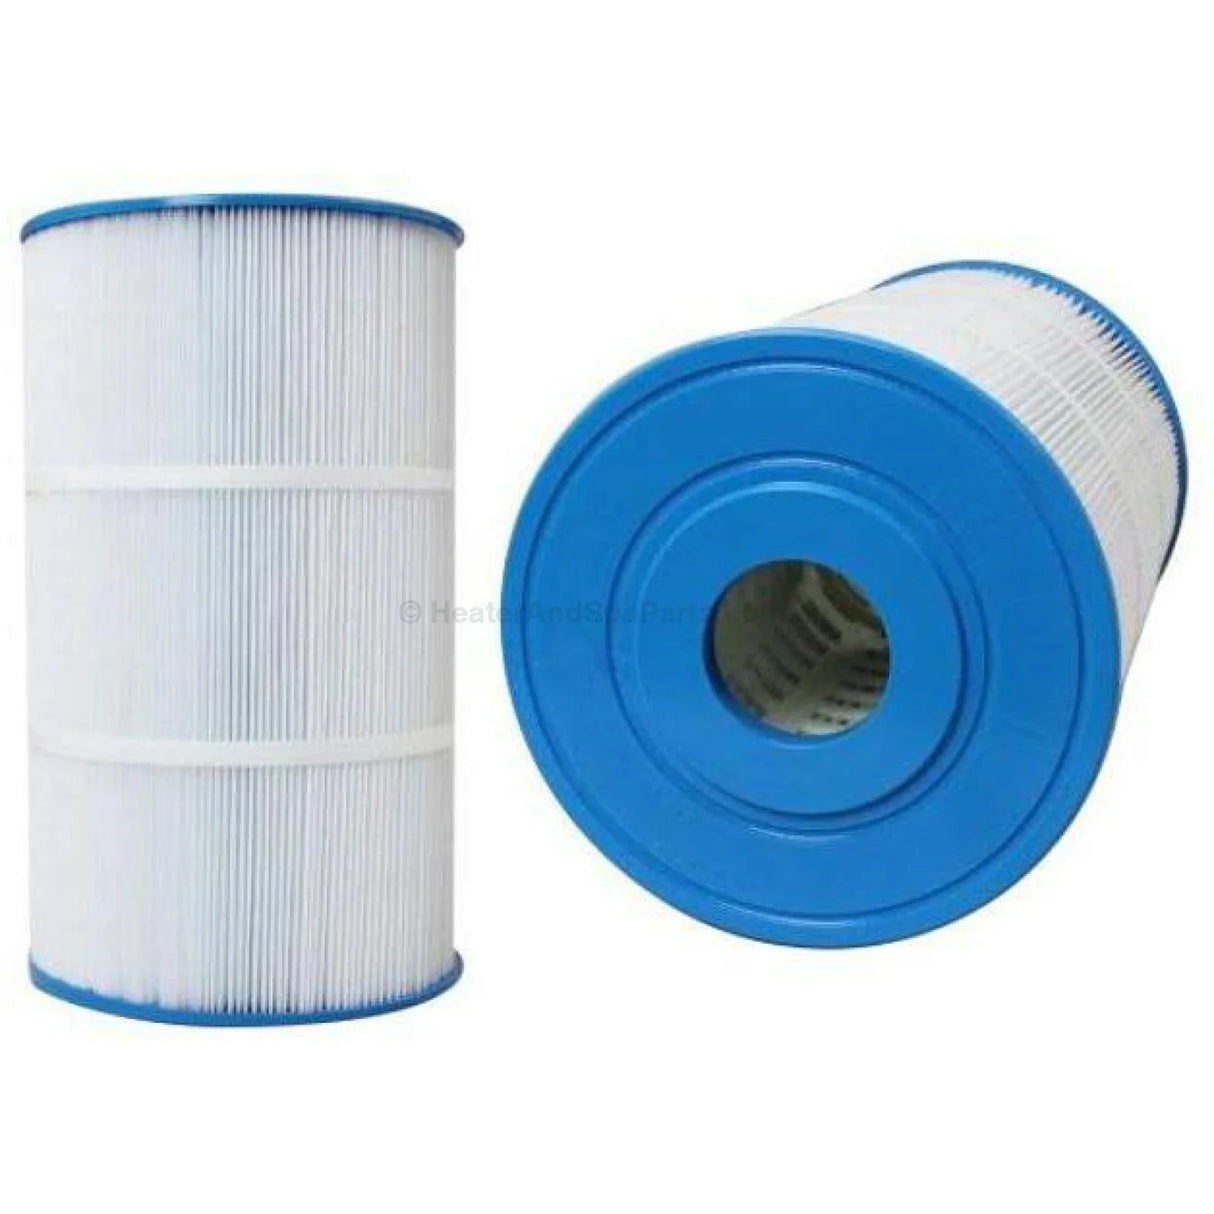 430mm x 260mm Opal 180 Cartridge Filter Replacement - Waterco Opal - Heater and Spa Parts